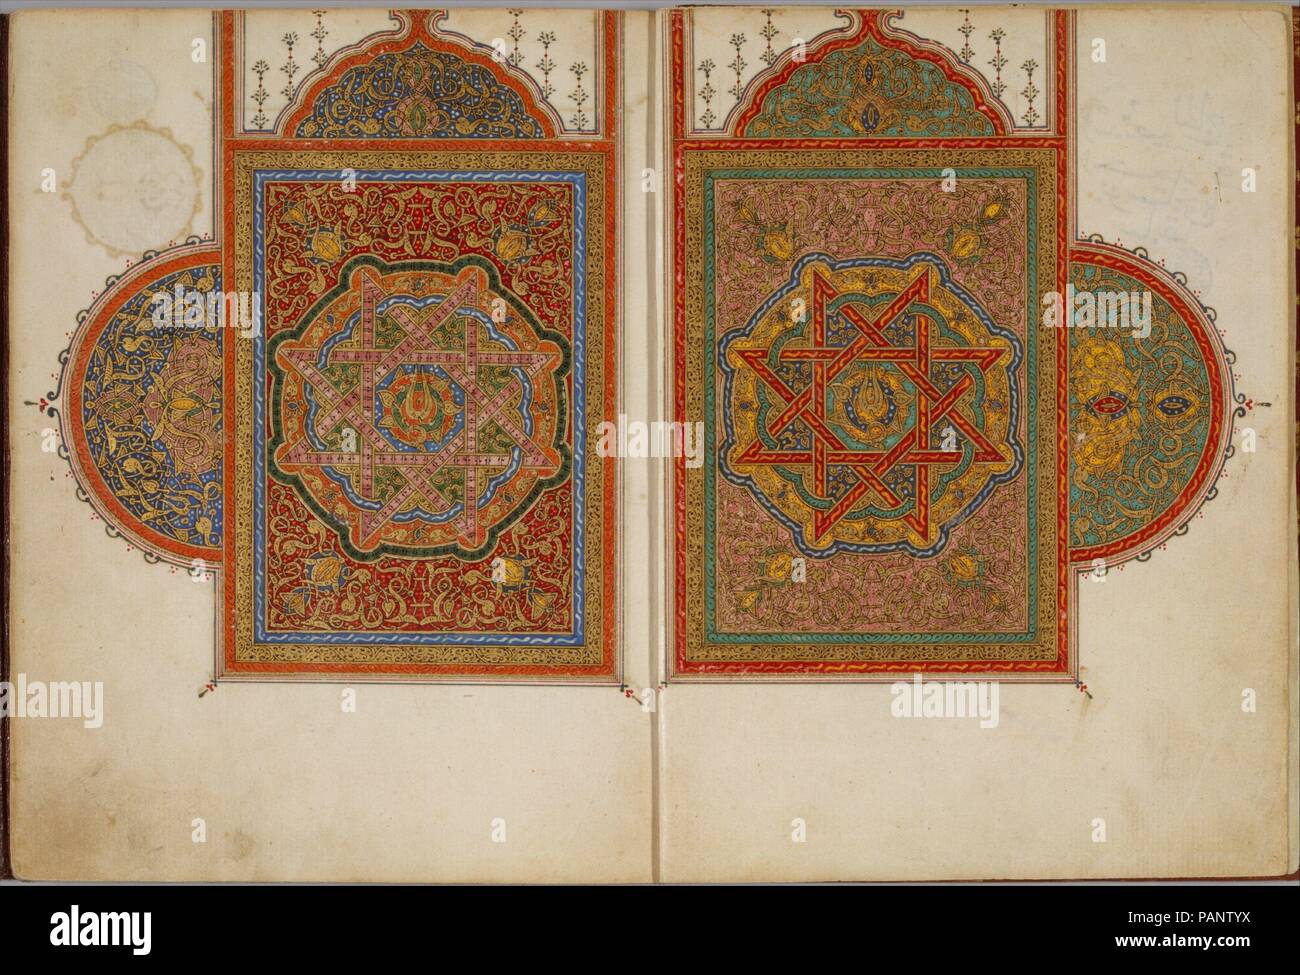 A Manuscript of Five Sections of a Qur'an. Dimensions: H. 7-31/32 in. (20.3cm)  W. 5-31/32 in. (15.2 cm). Date: 18th century.  Two lavishly illuminated double pages open and close this juz' (section) from a Qur'an, which was bound in finely worked leather. The intricate geometric and vegetal decoration of this illumination is conservative and the calligraphy employed here represents a type of script that was almost unchanged in North Africa since the twelfth century, but the rectangular format, the use of paper, and the varied color palette of the illumination are characteristic of the manuscr Stock Photo